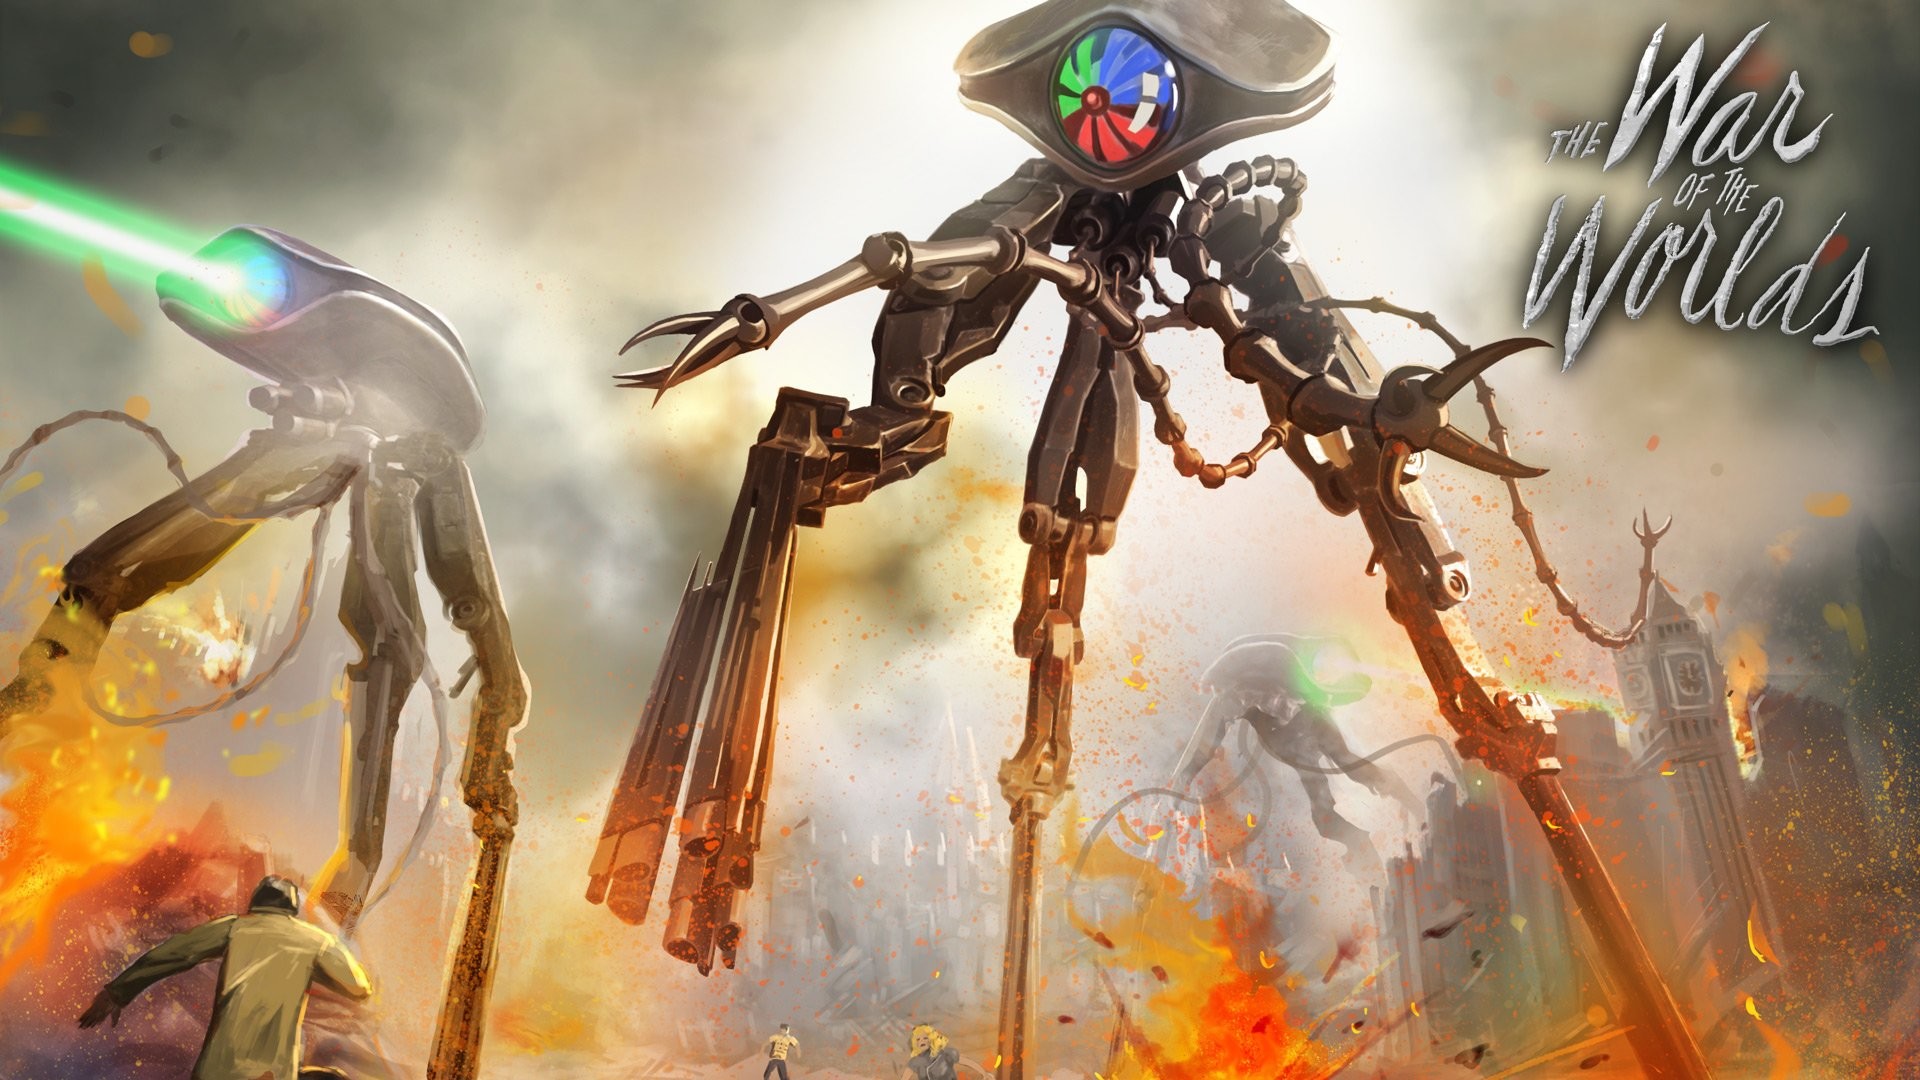 1920x1080 War Of The Worlds Xbox 360